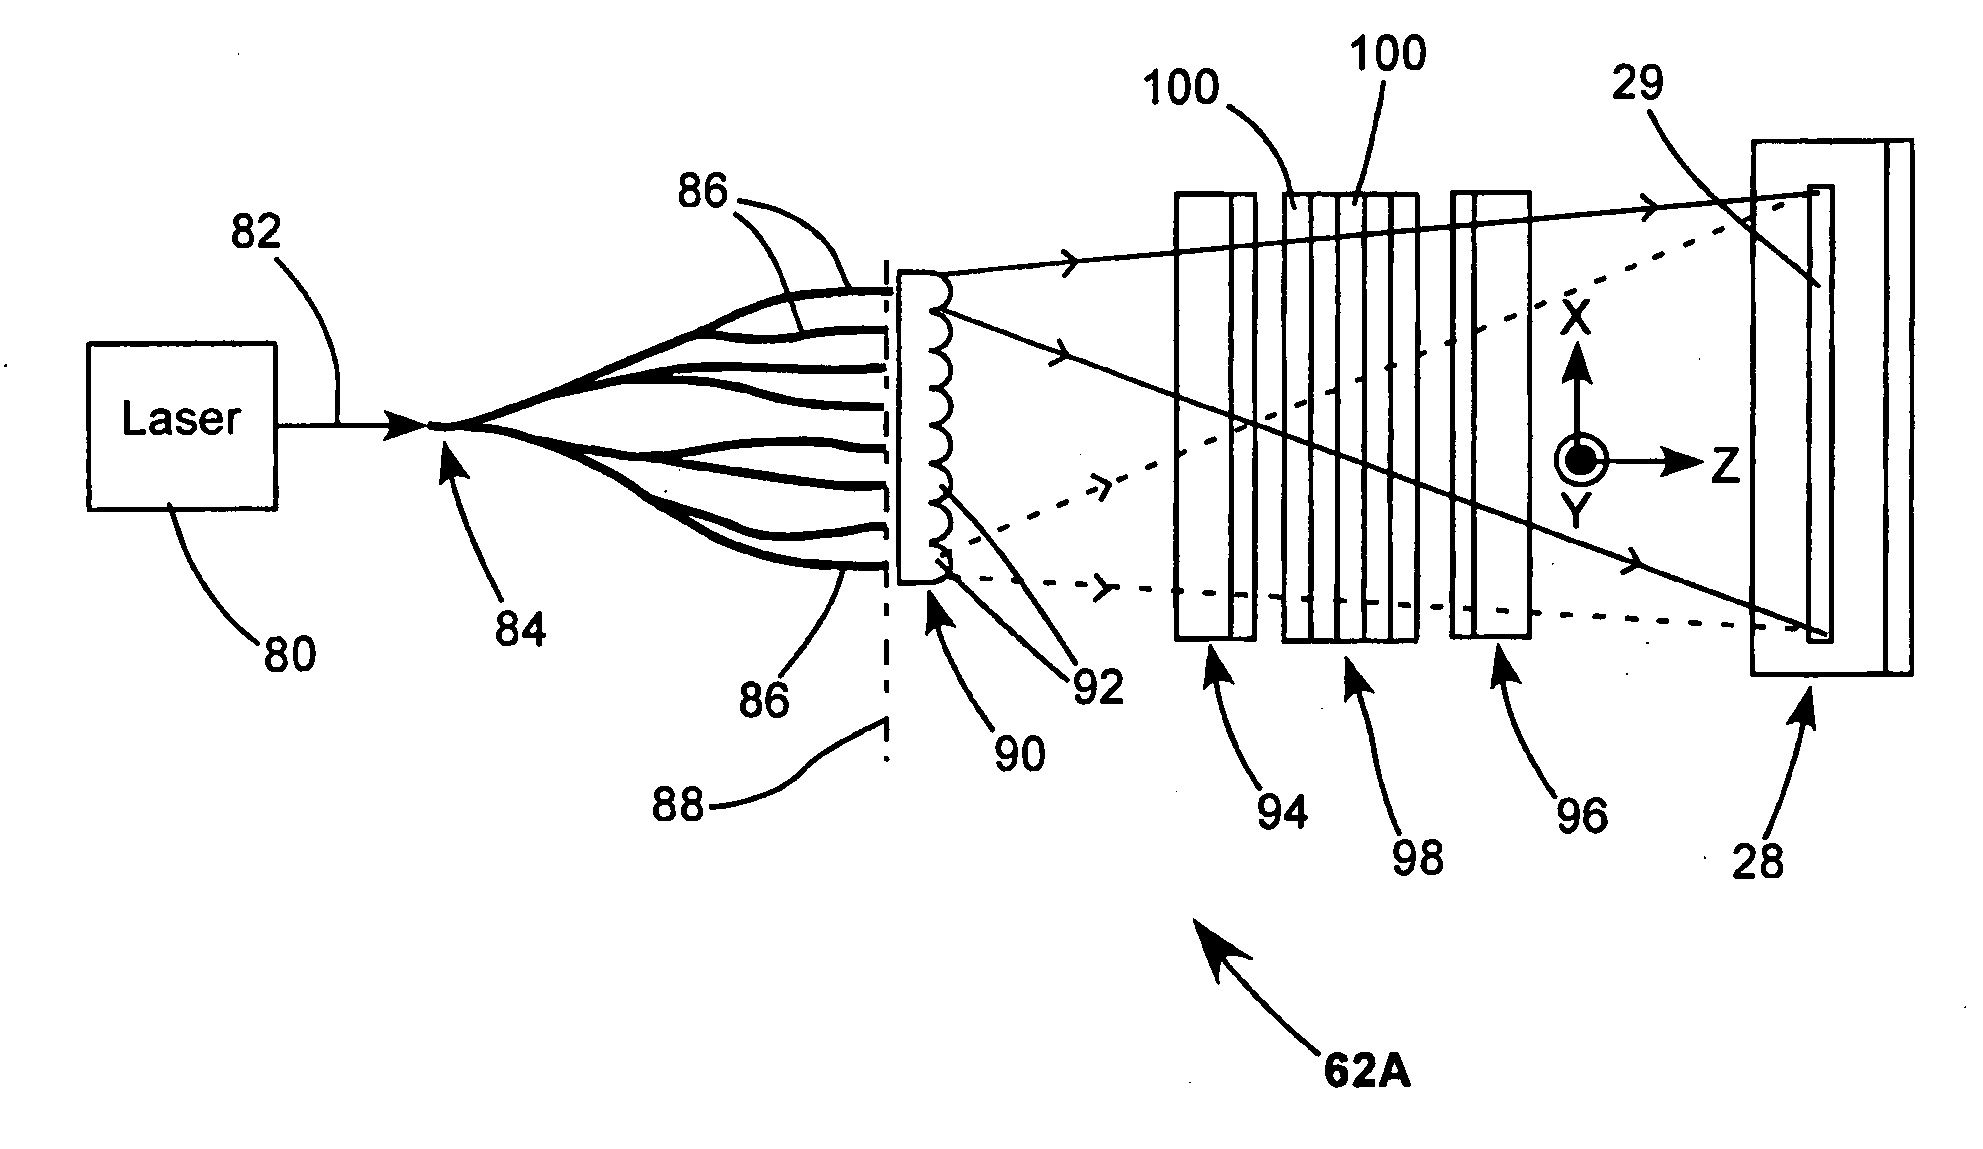 Speckle reduction in laser illuminated projection displays having a one-dimensional spatial light modulator